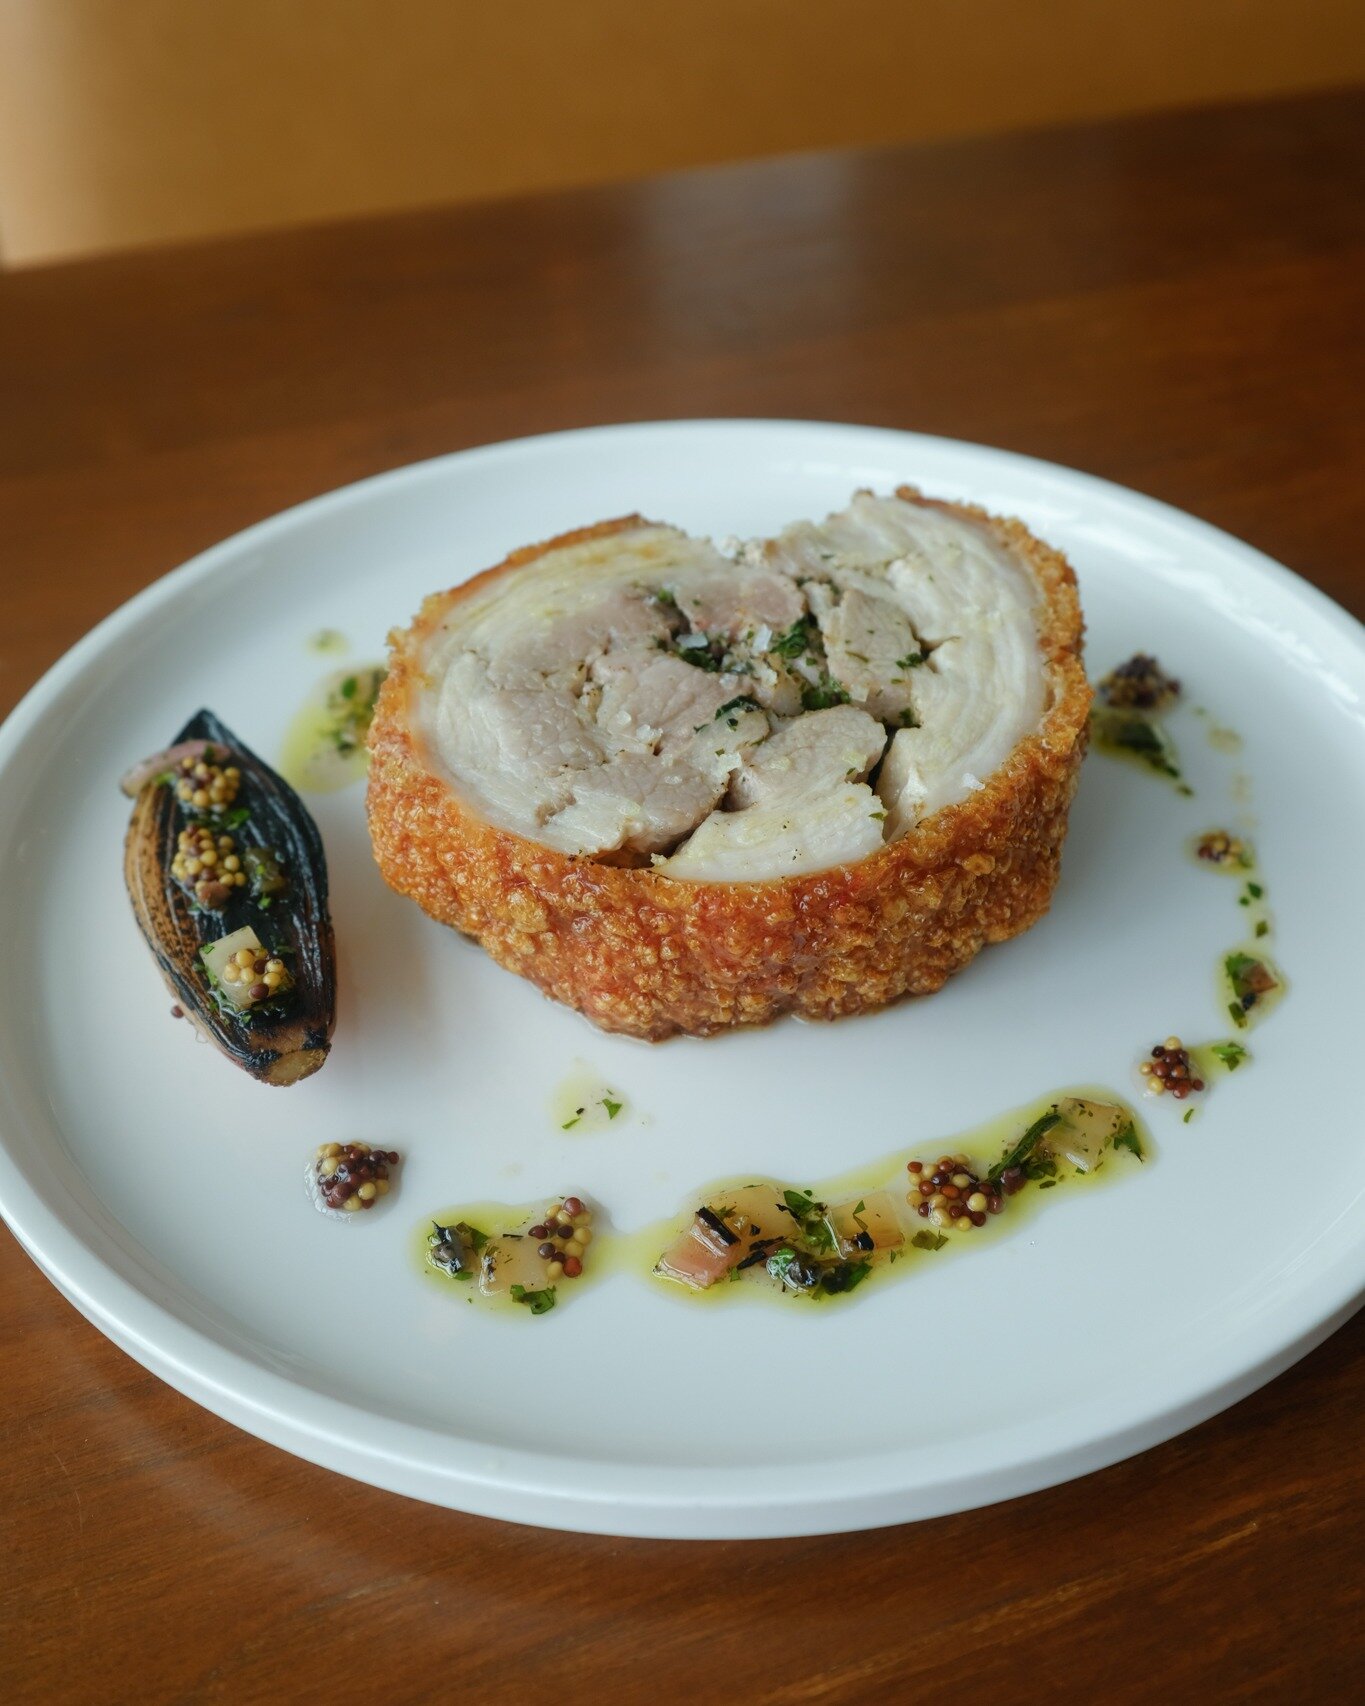 Make your Good Friday even better with our special Easter weekend highlights.

An Italian delicacy traditionally enjoyed as a celebratory dish, our aromatic and juicy Porchetta is a must-try. Seasoned with anchovy butter and a medley of herbs, pork b